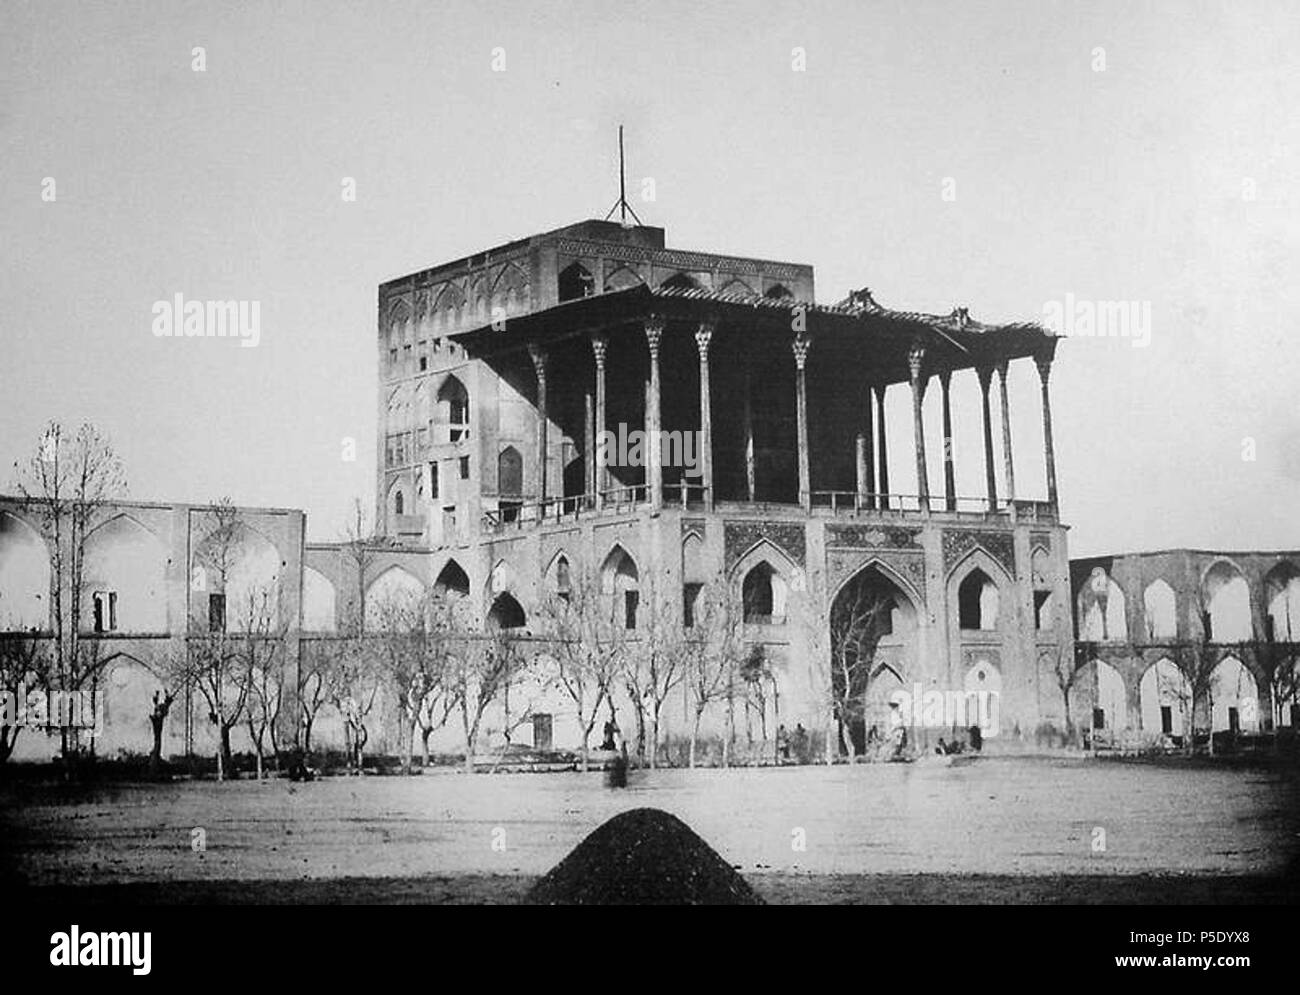 N/A. English: Ali-Qapu builging in Naqsh-e Jahan Square. 1885.   Ernst Hoeltzer  (1835–1911)     Description German telegraphist and photographer  Date of birth/death 7 January 1835 3 July 1911  Location of birth/death Kleinschmalkalden, Thuringian Forest, Germany Isfahan, Iran (Iran)  Work period 1835–1897  Work location Isfahan  Authority control  : Q122748 VIAF: 45407273 ISNI: 0000 0000 6687 4297 ULAN: 500075604 LCCN: n2007045754 GND: 130369551 WorldCat 85 Ali-Qapu-1885 Stock Photo